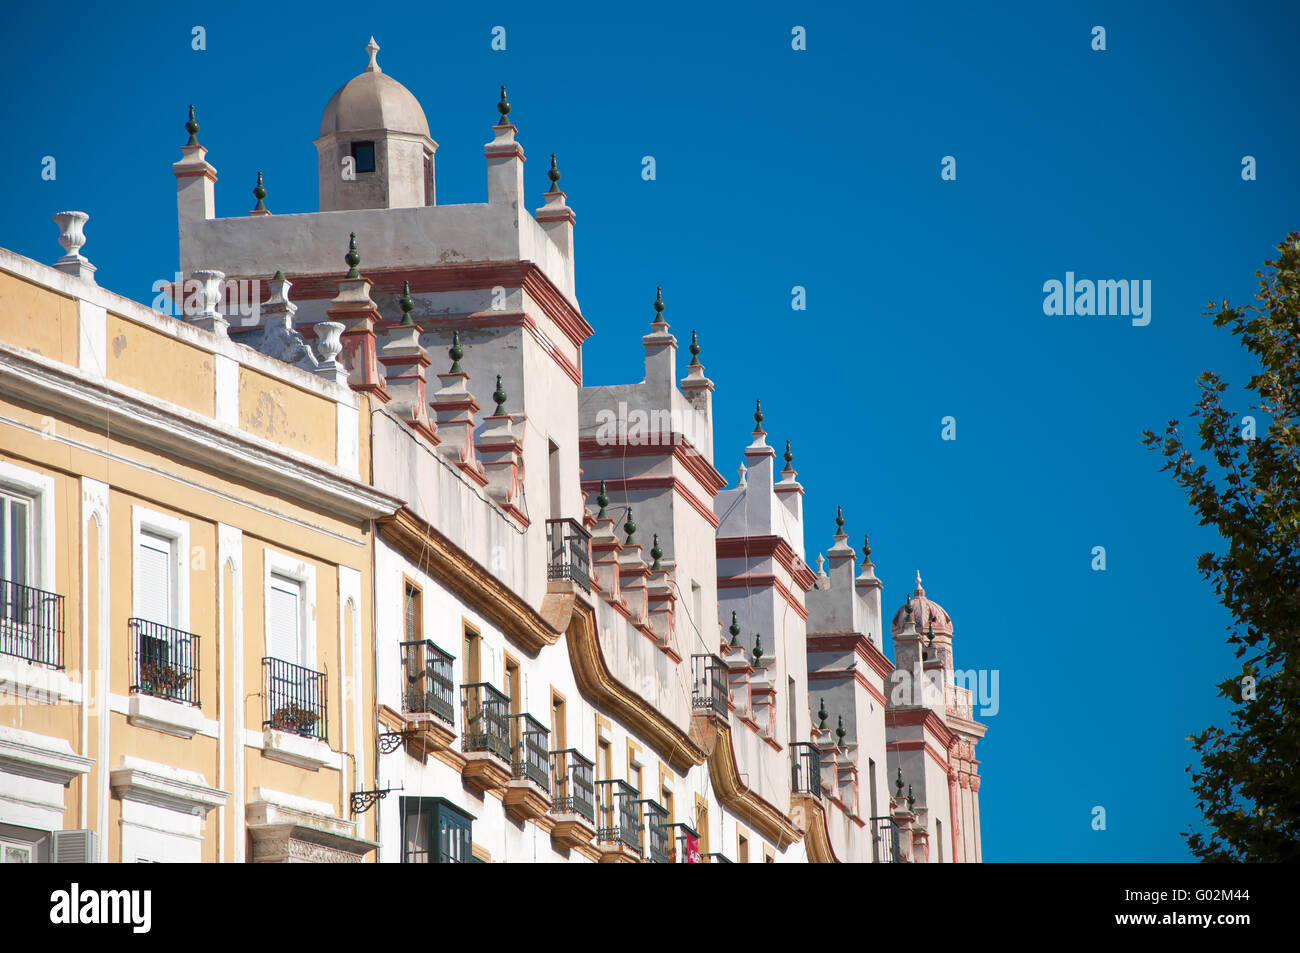 home of the five towers, Spain square, Cadiz Stock Photo